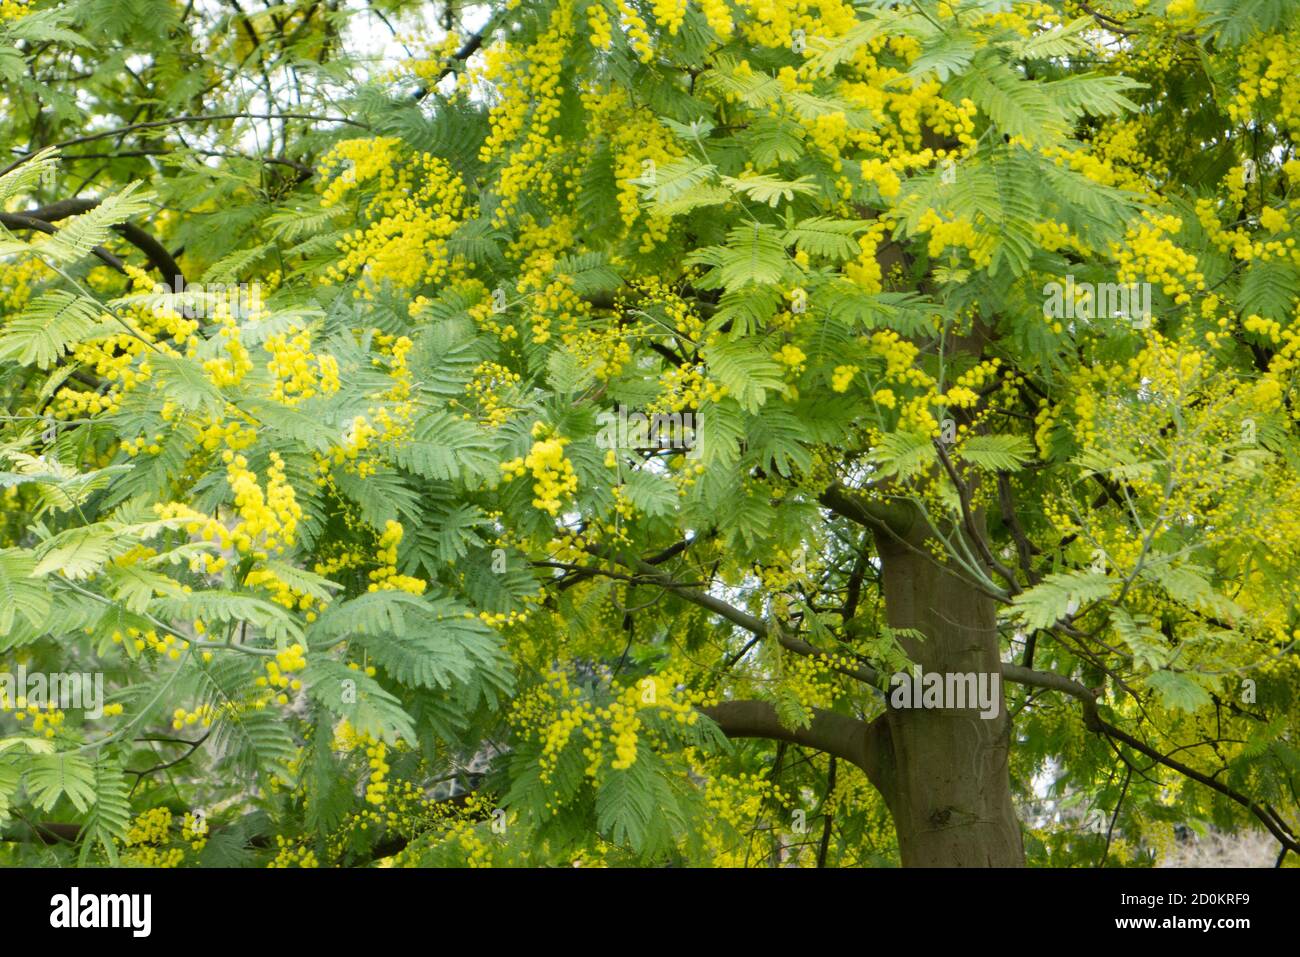 Mimosa Silver Blue Wattle Acacia Dealbata Tree With Yellow Flowers In Full Bloom In Spring Stock Photo Alamy